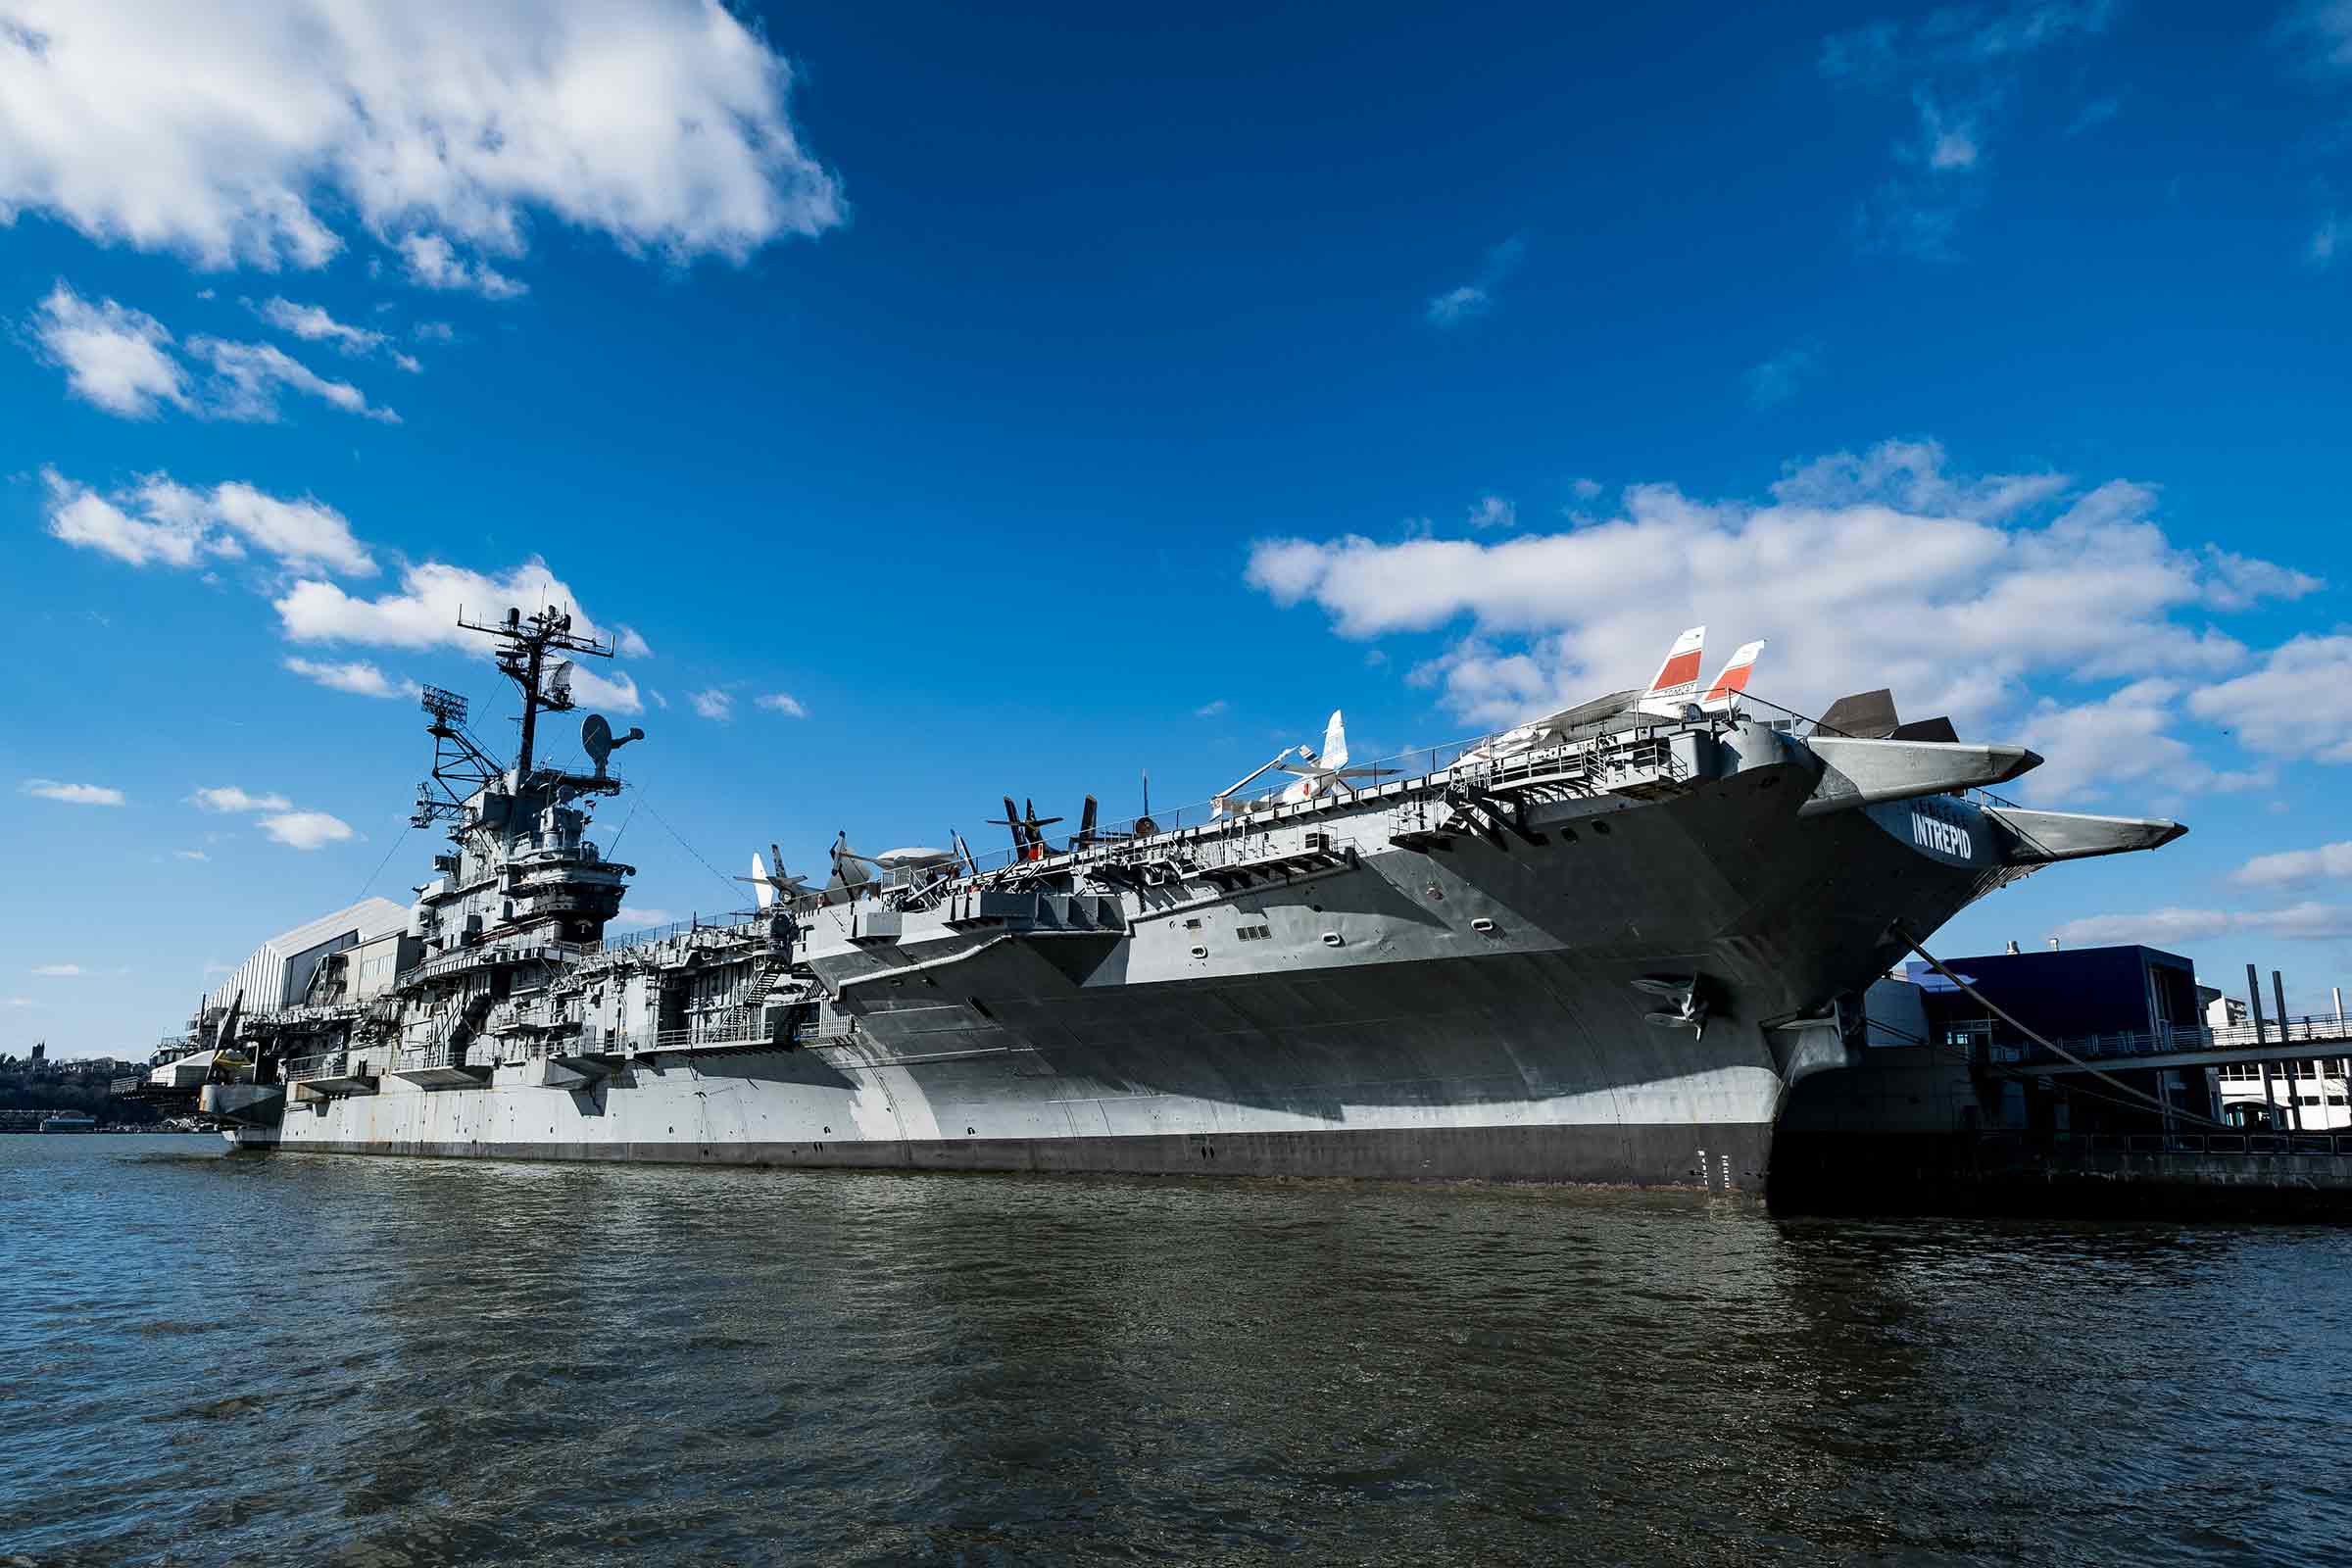 The Intrepid majestically sits on the Hudson River